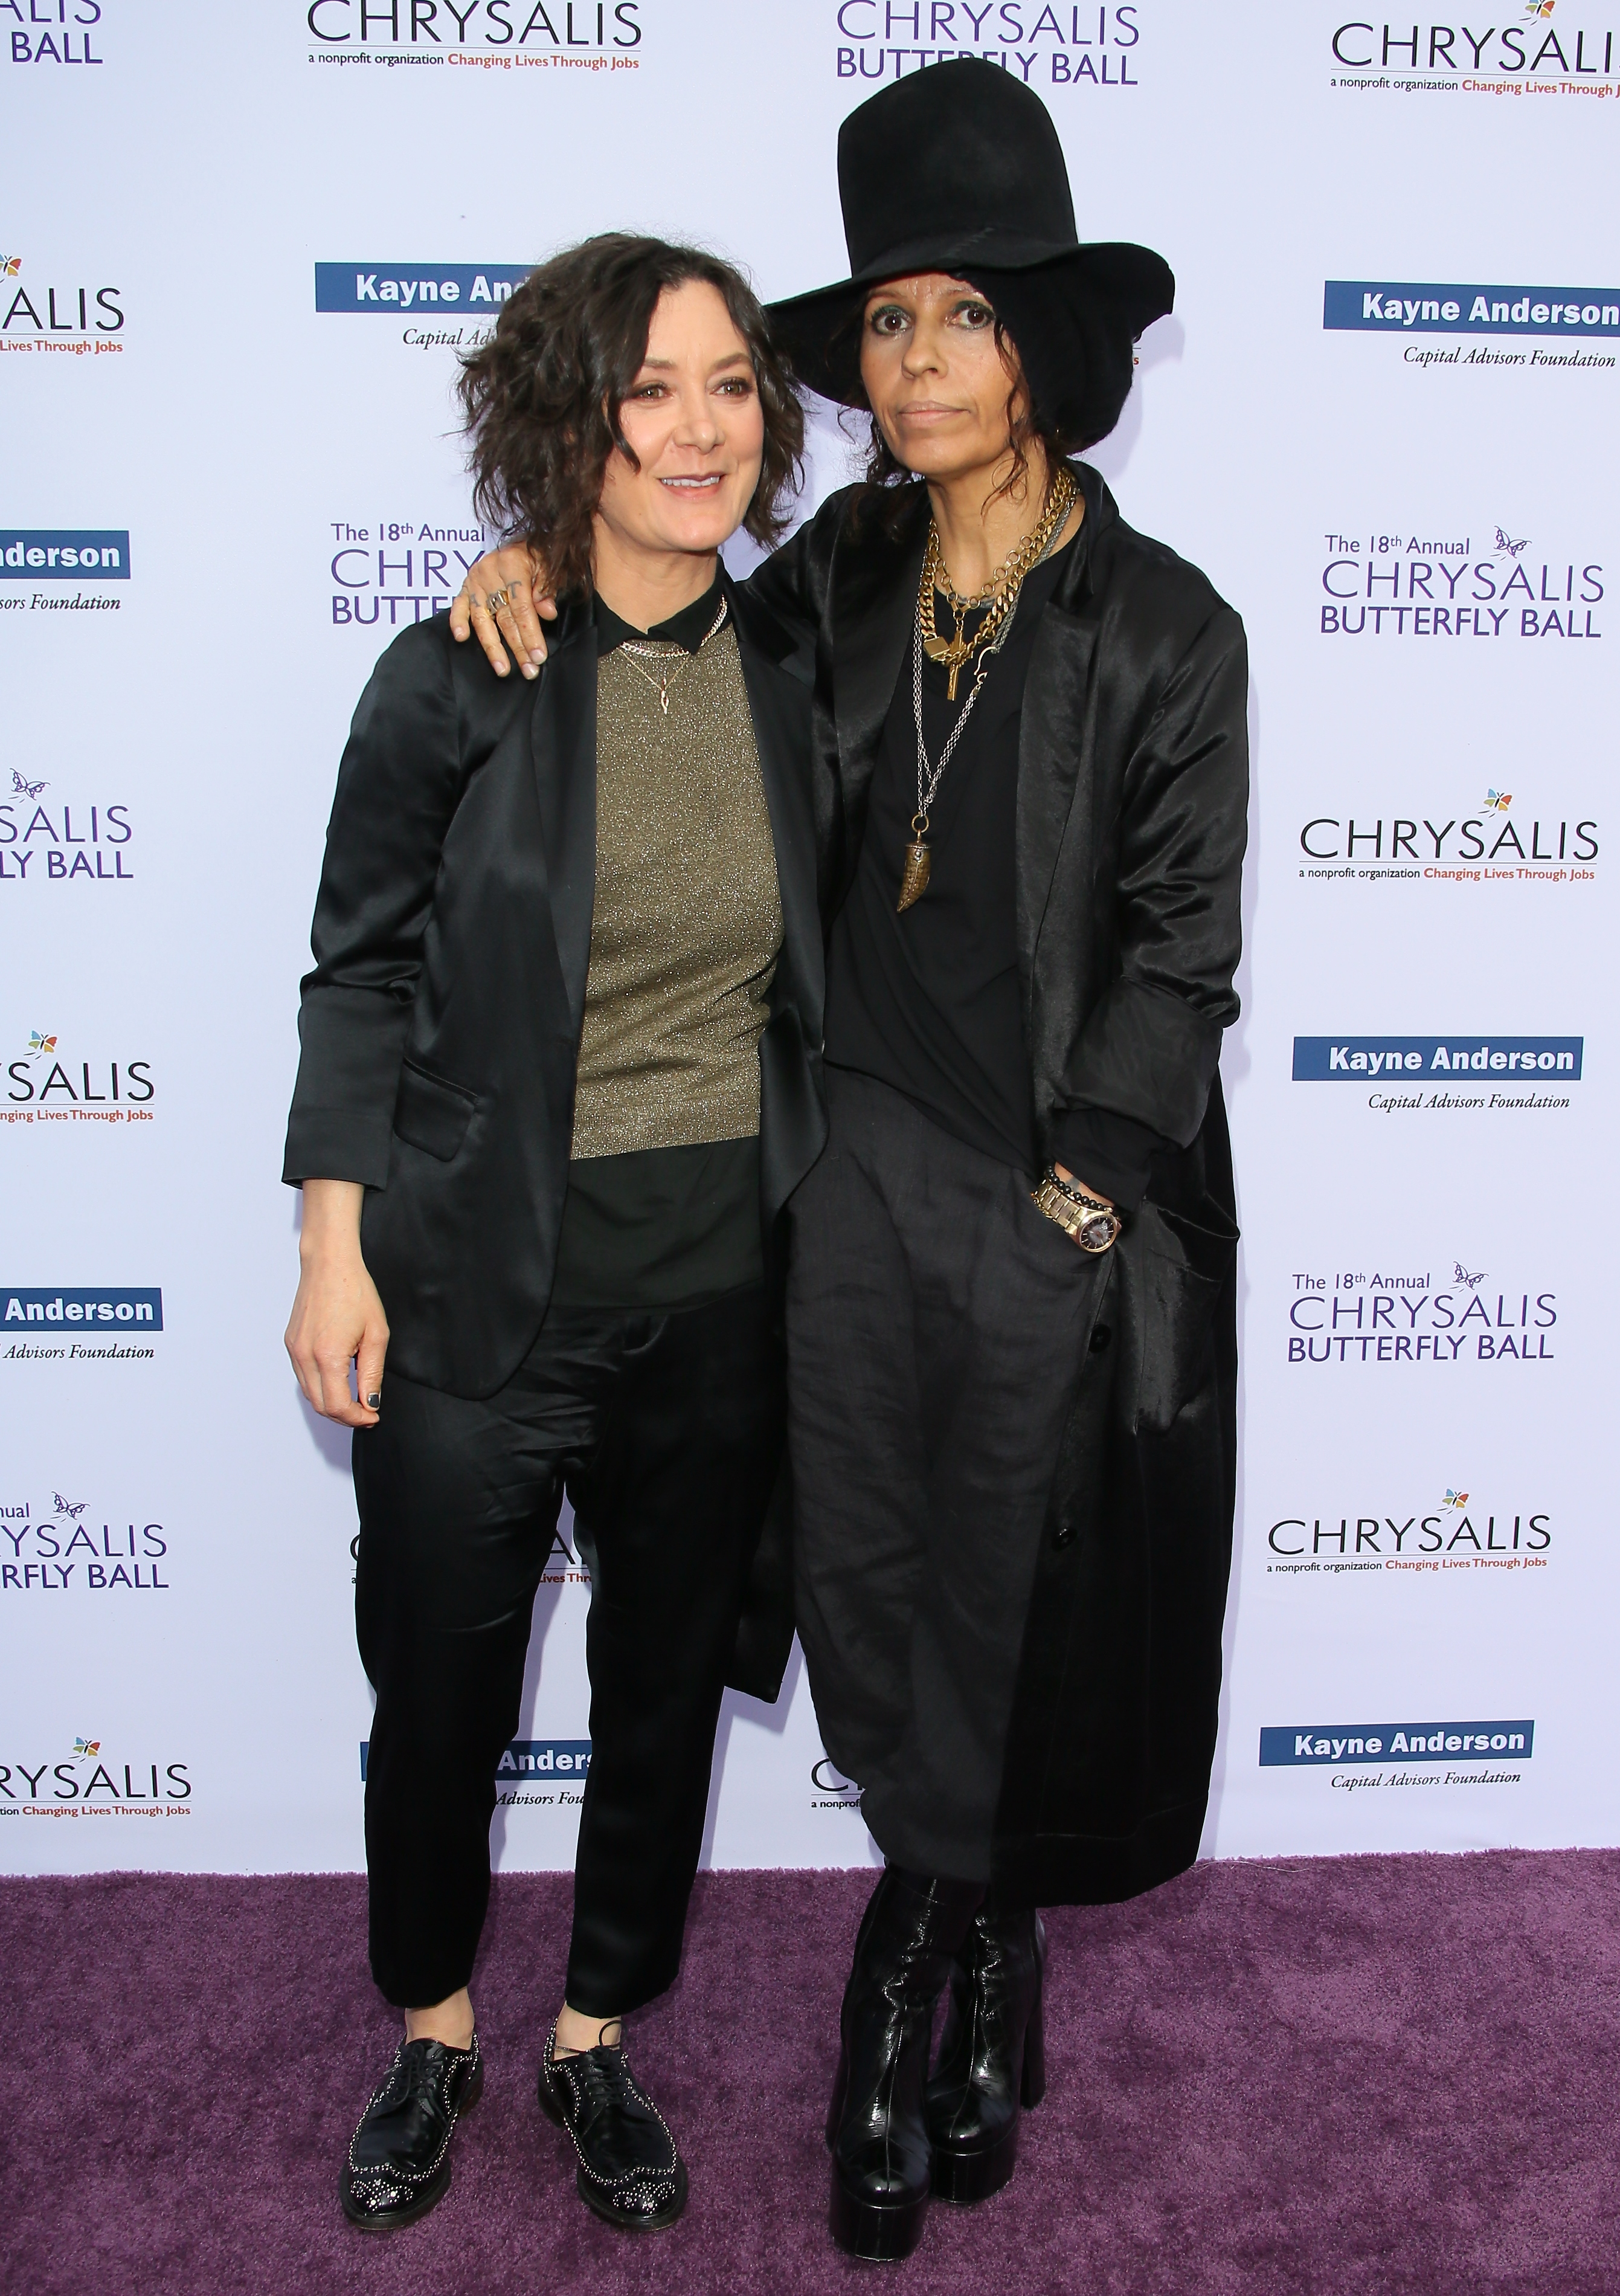 Sara Gilbert and Linda Perry at the 18th Annual Chrysalis Butterfly Ball in Brentwood, California on June 1, 2019 | Source: Getty Images